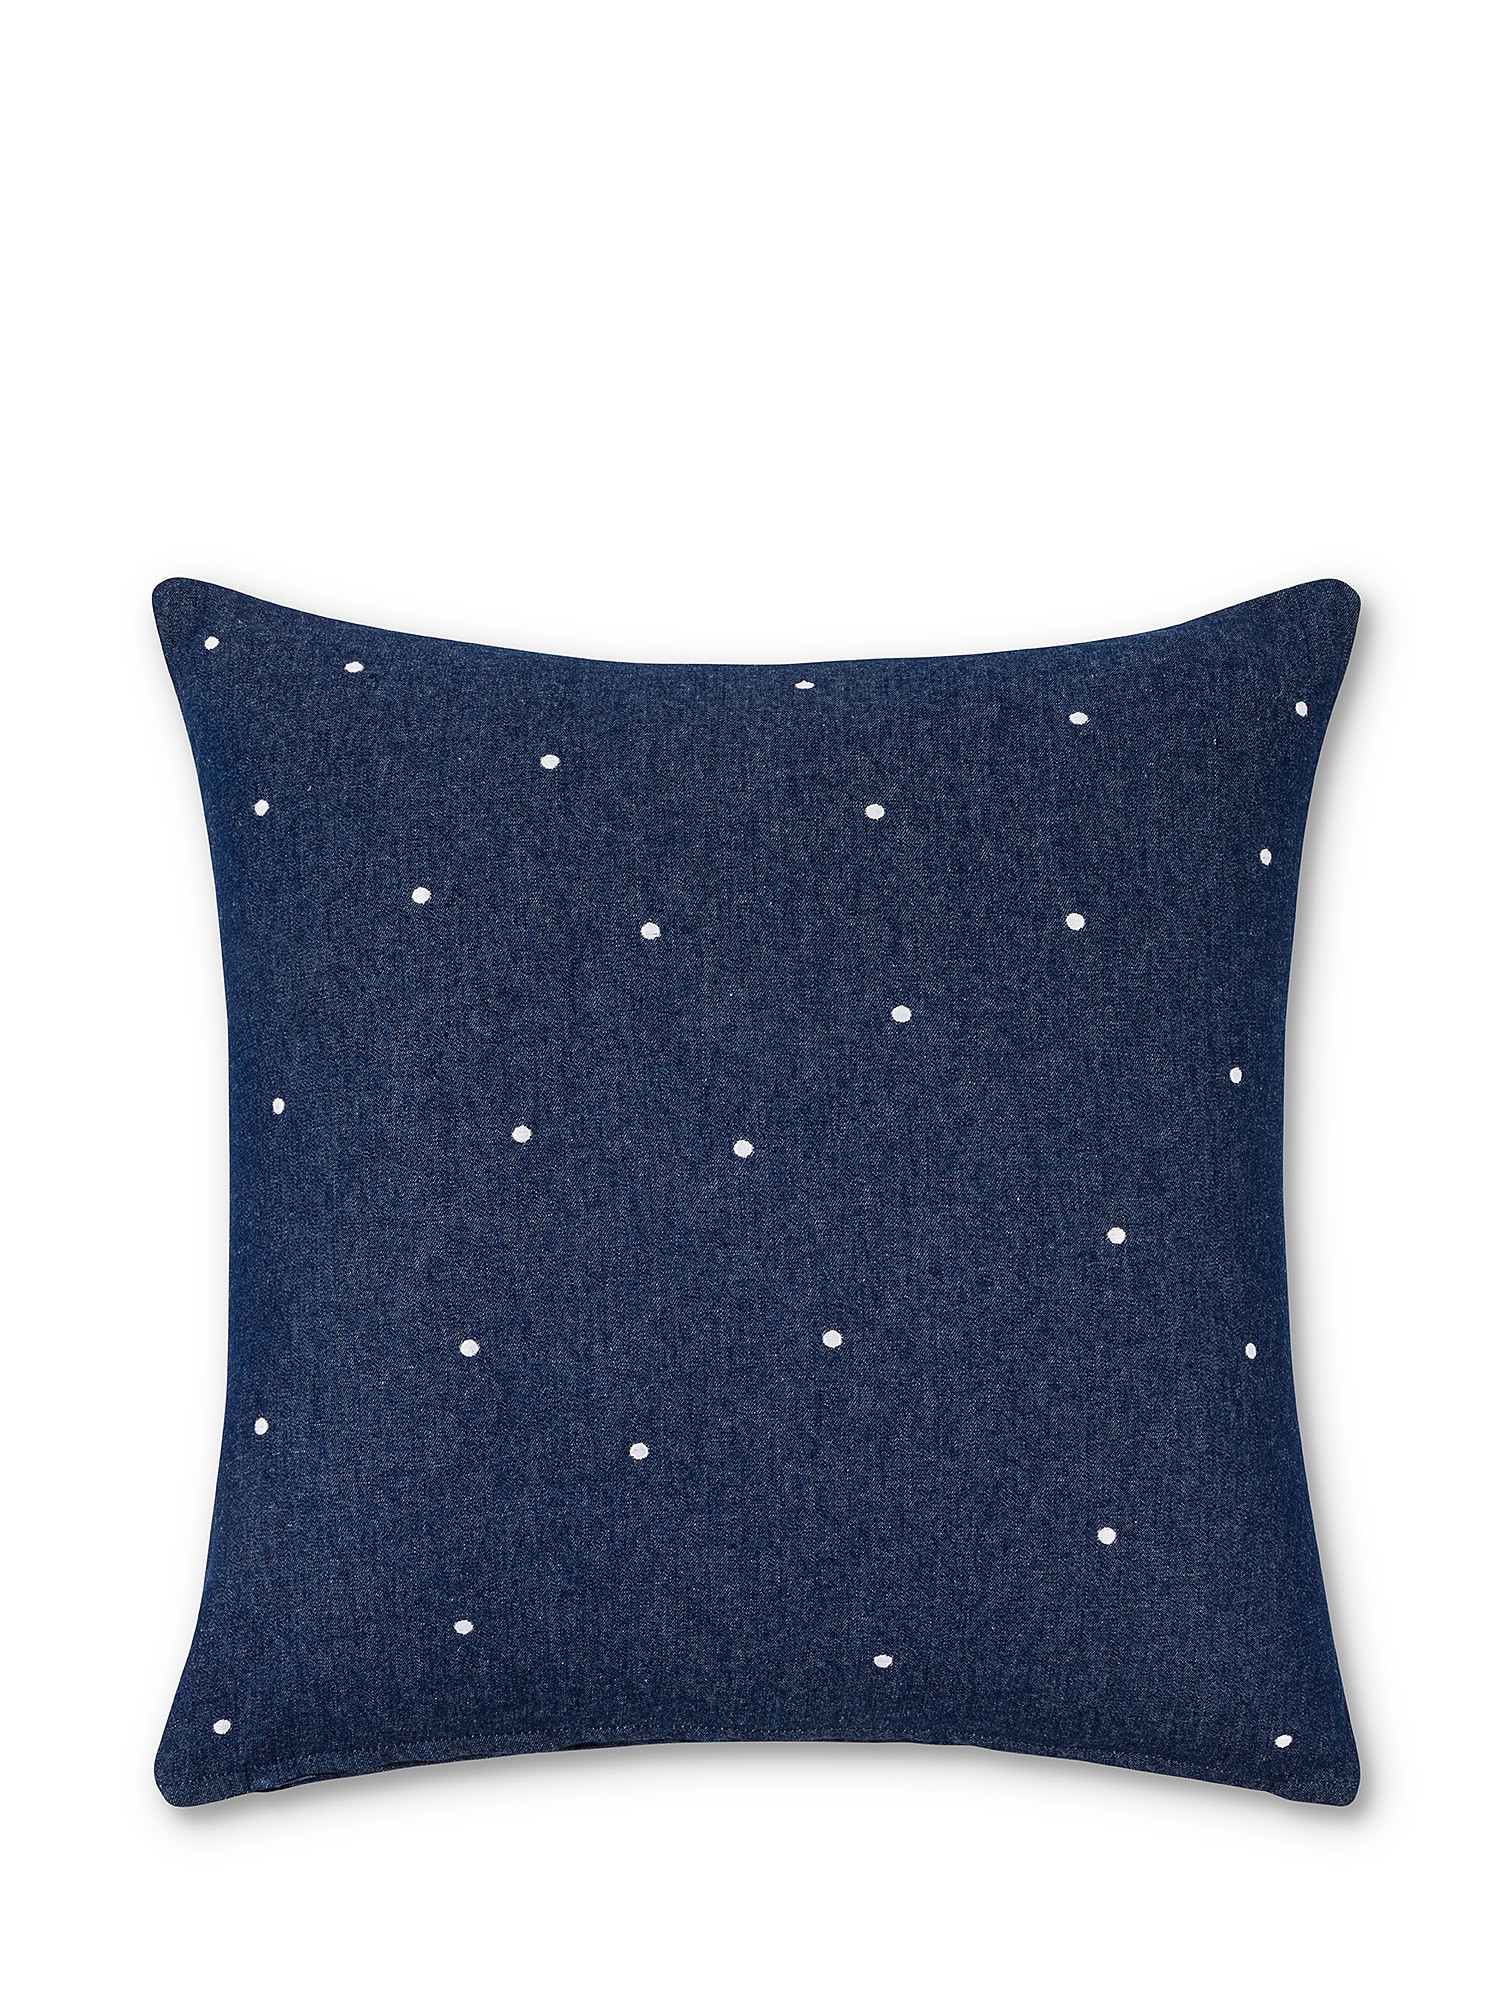 Cotton denim cushion with polka dot embroidery 45x45cm, Blue, large image number 0